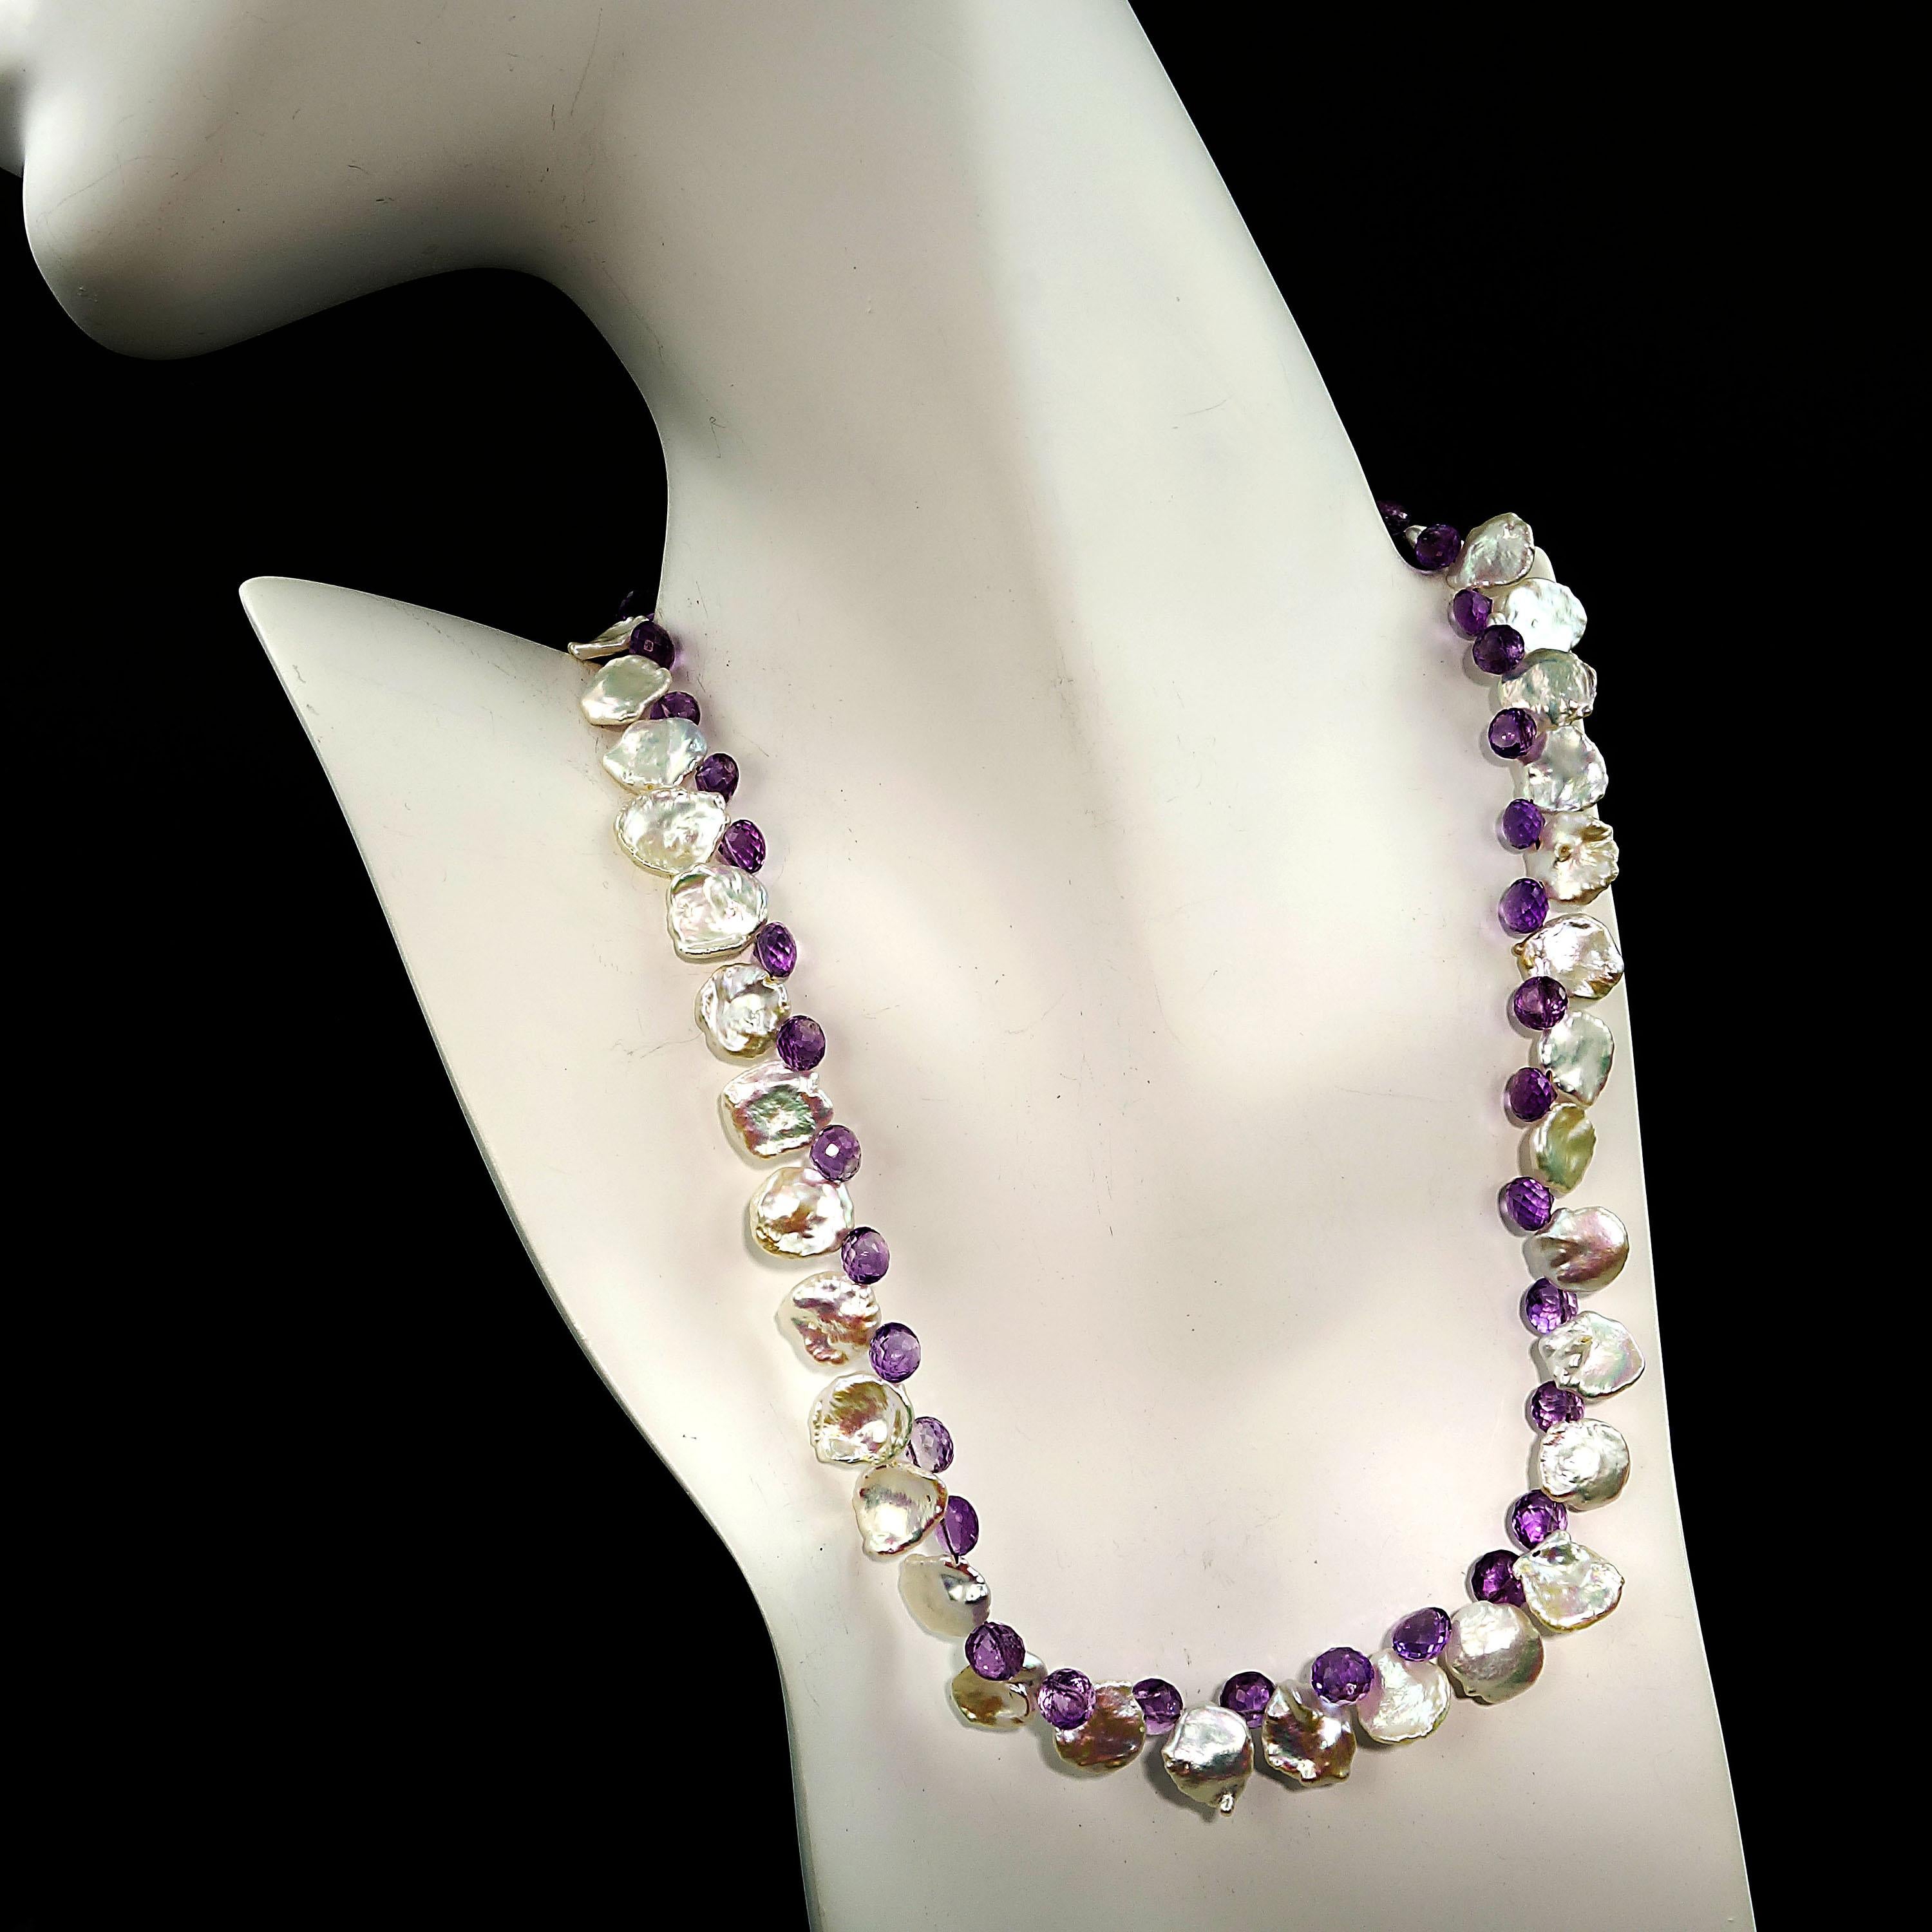 Handmade, delicate Necklace of 11mm round Iridescent Keshi Pearls and fat, faceted lavender Amethyst briolettes, 6x7mm. The Keshi Pearls reflect the lavender in the Amethyst for a lovely combination of color and texture. This custom made necklace is